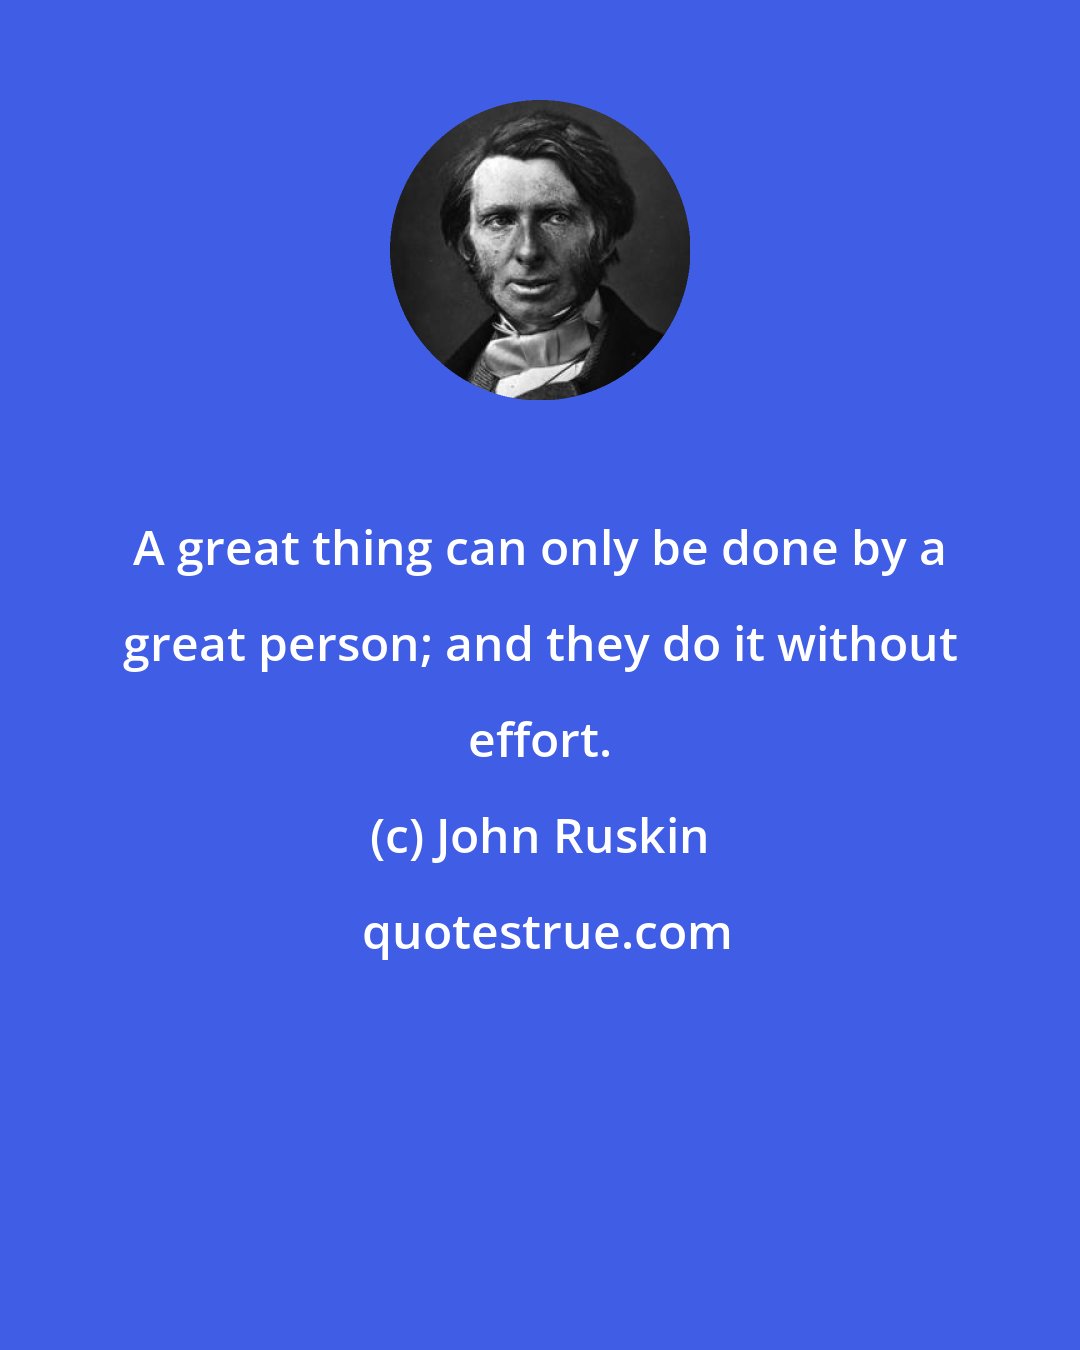 John Ruskin: A great thing can only be done by a great person; and they do it without effort.